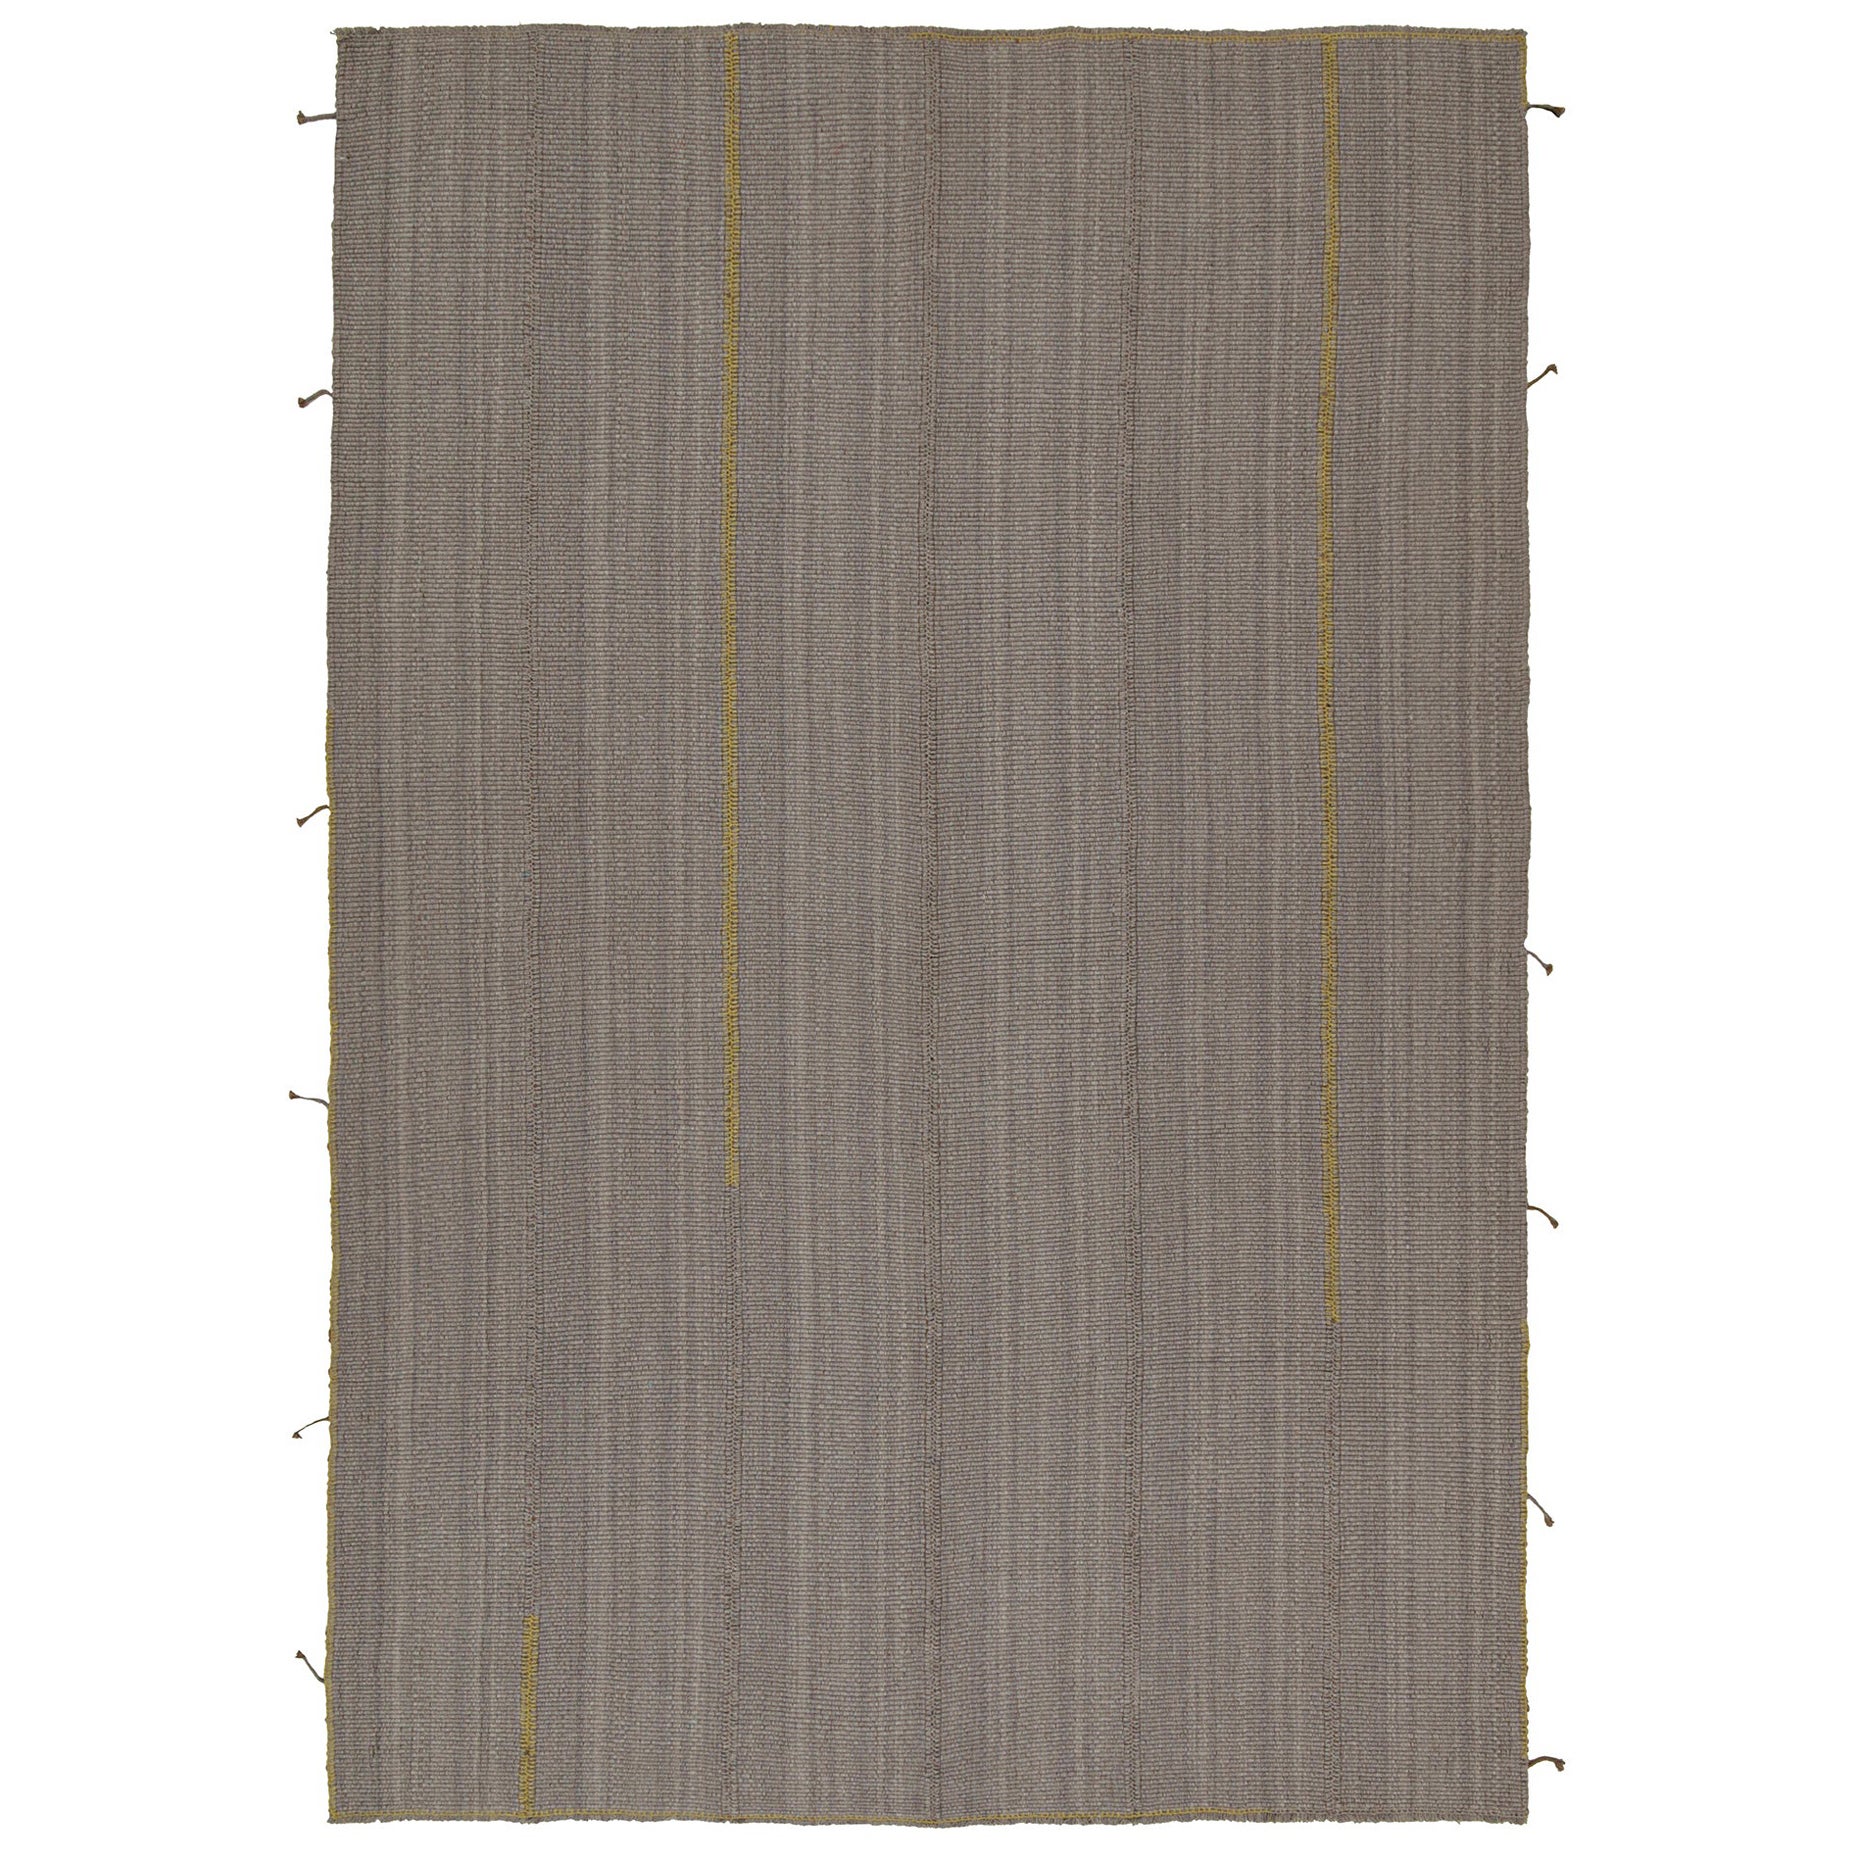 Rug & Kilim’s Contemporary Kilim Rug in Gray with Mustard and Brown Accents For Sale